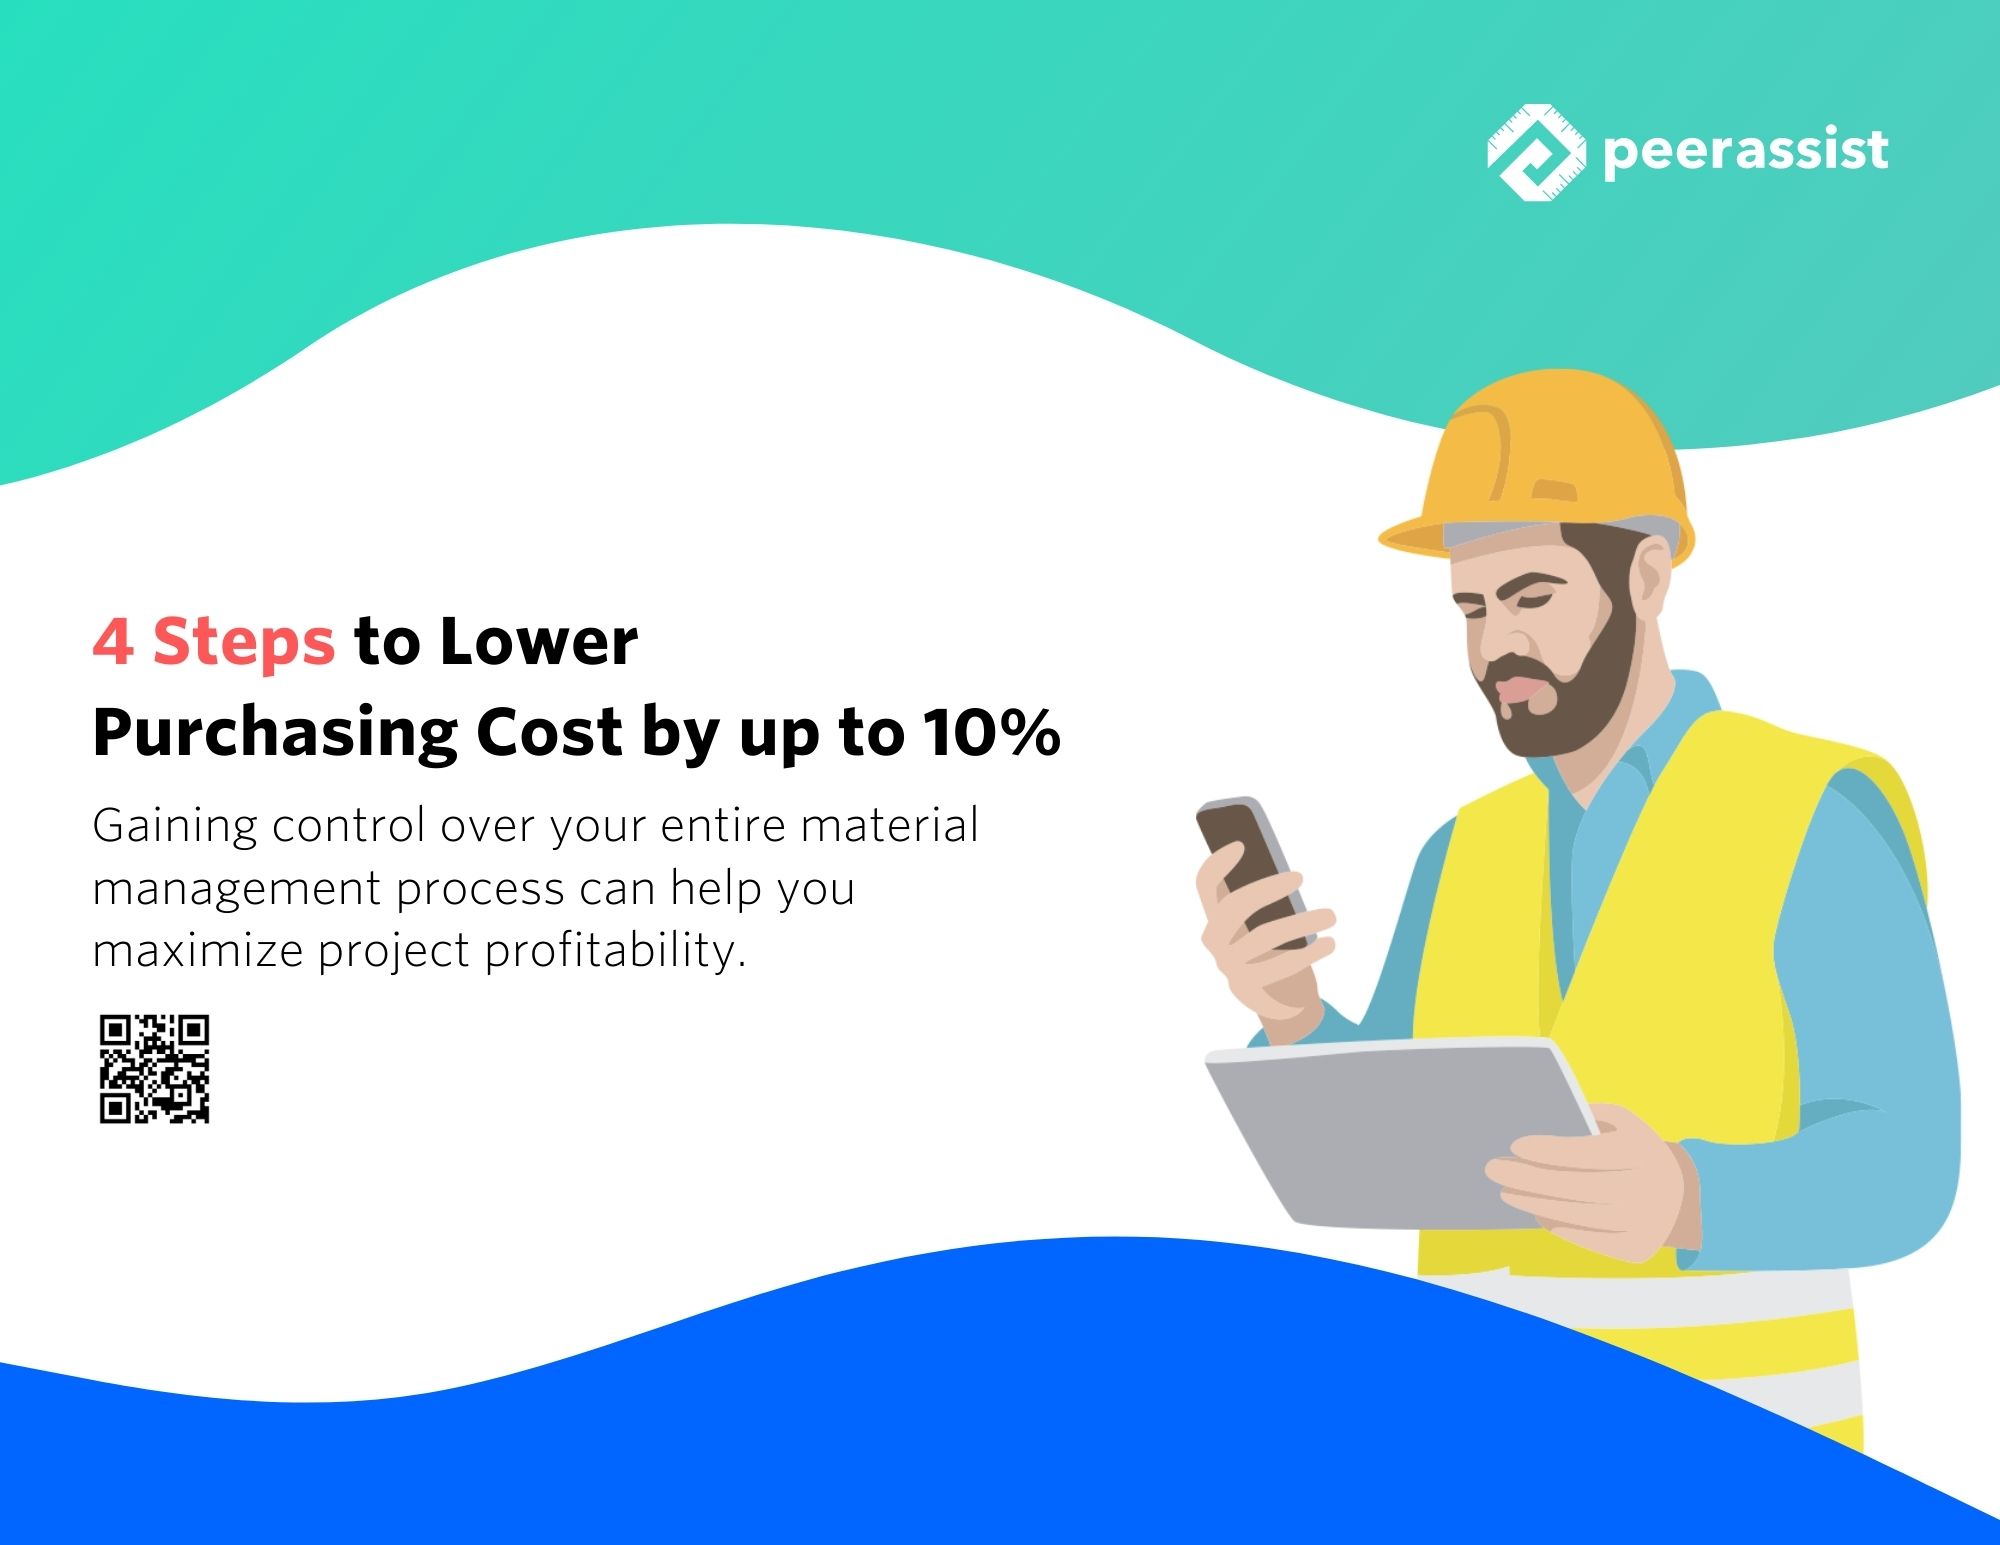 4 Steps to Lower Purchasing Cost by up to 10%